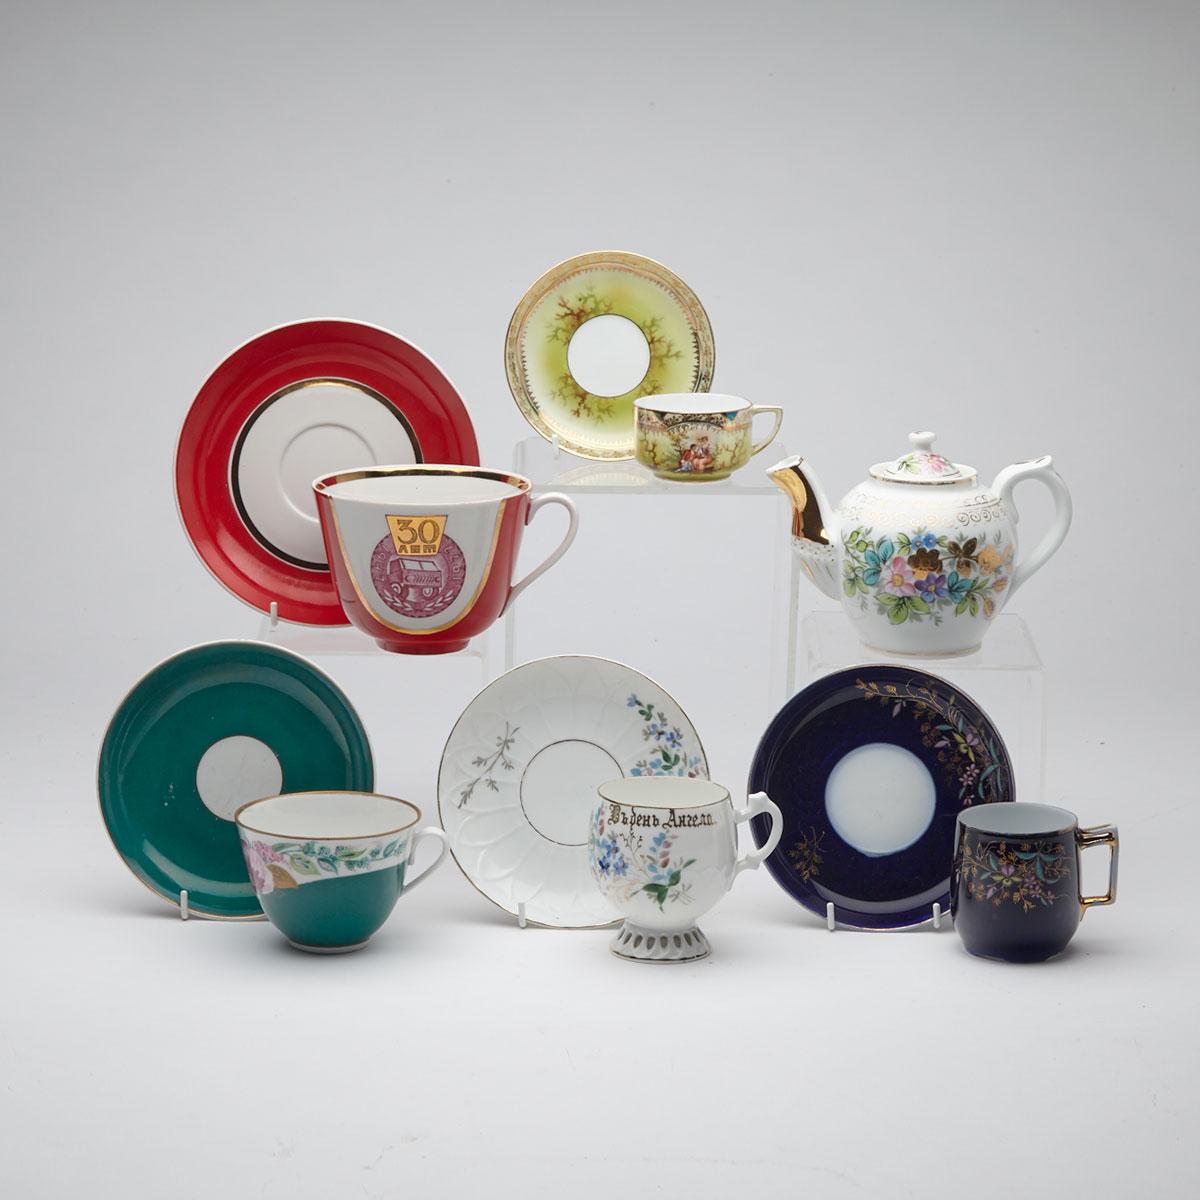 Group of Three Kuznetsov Cups and Saucers and a Teapot, Lomonosov Botanical Cup and Saucer and a Dulevo Guards Unit Cup and Saucer, mainly 20th century